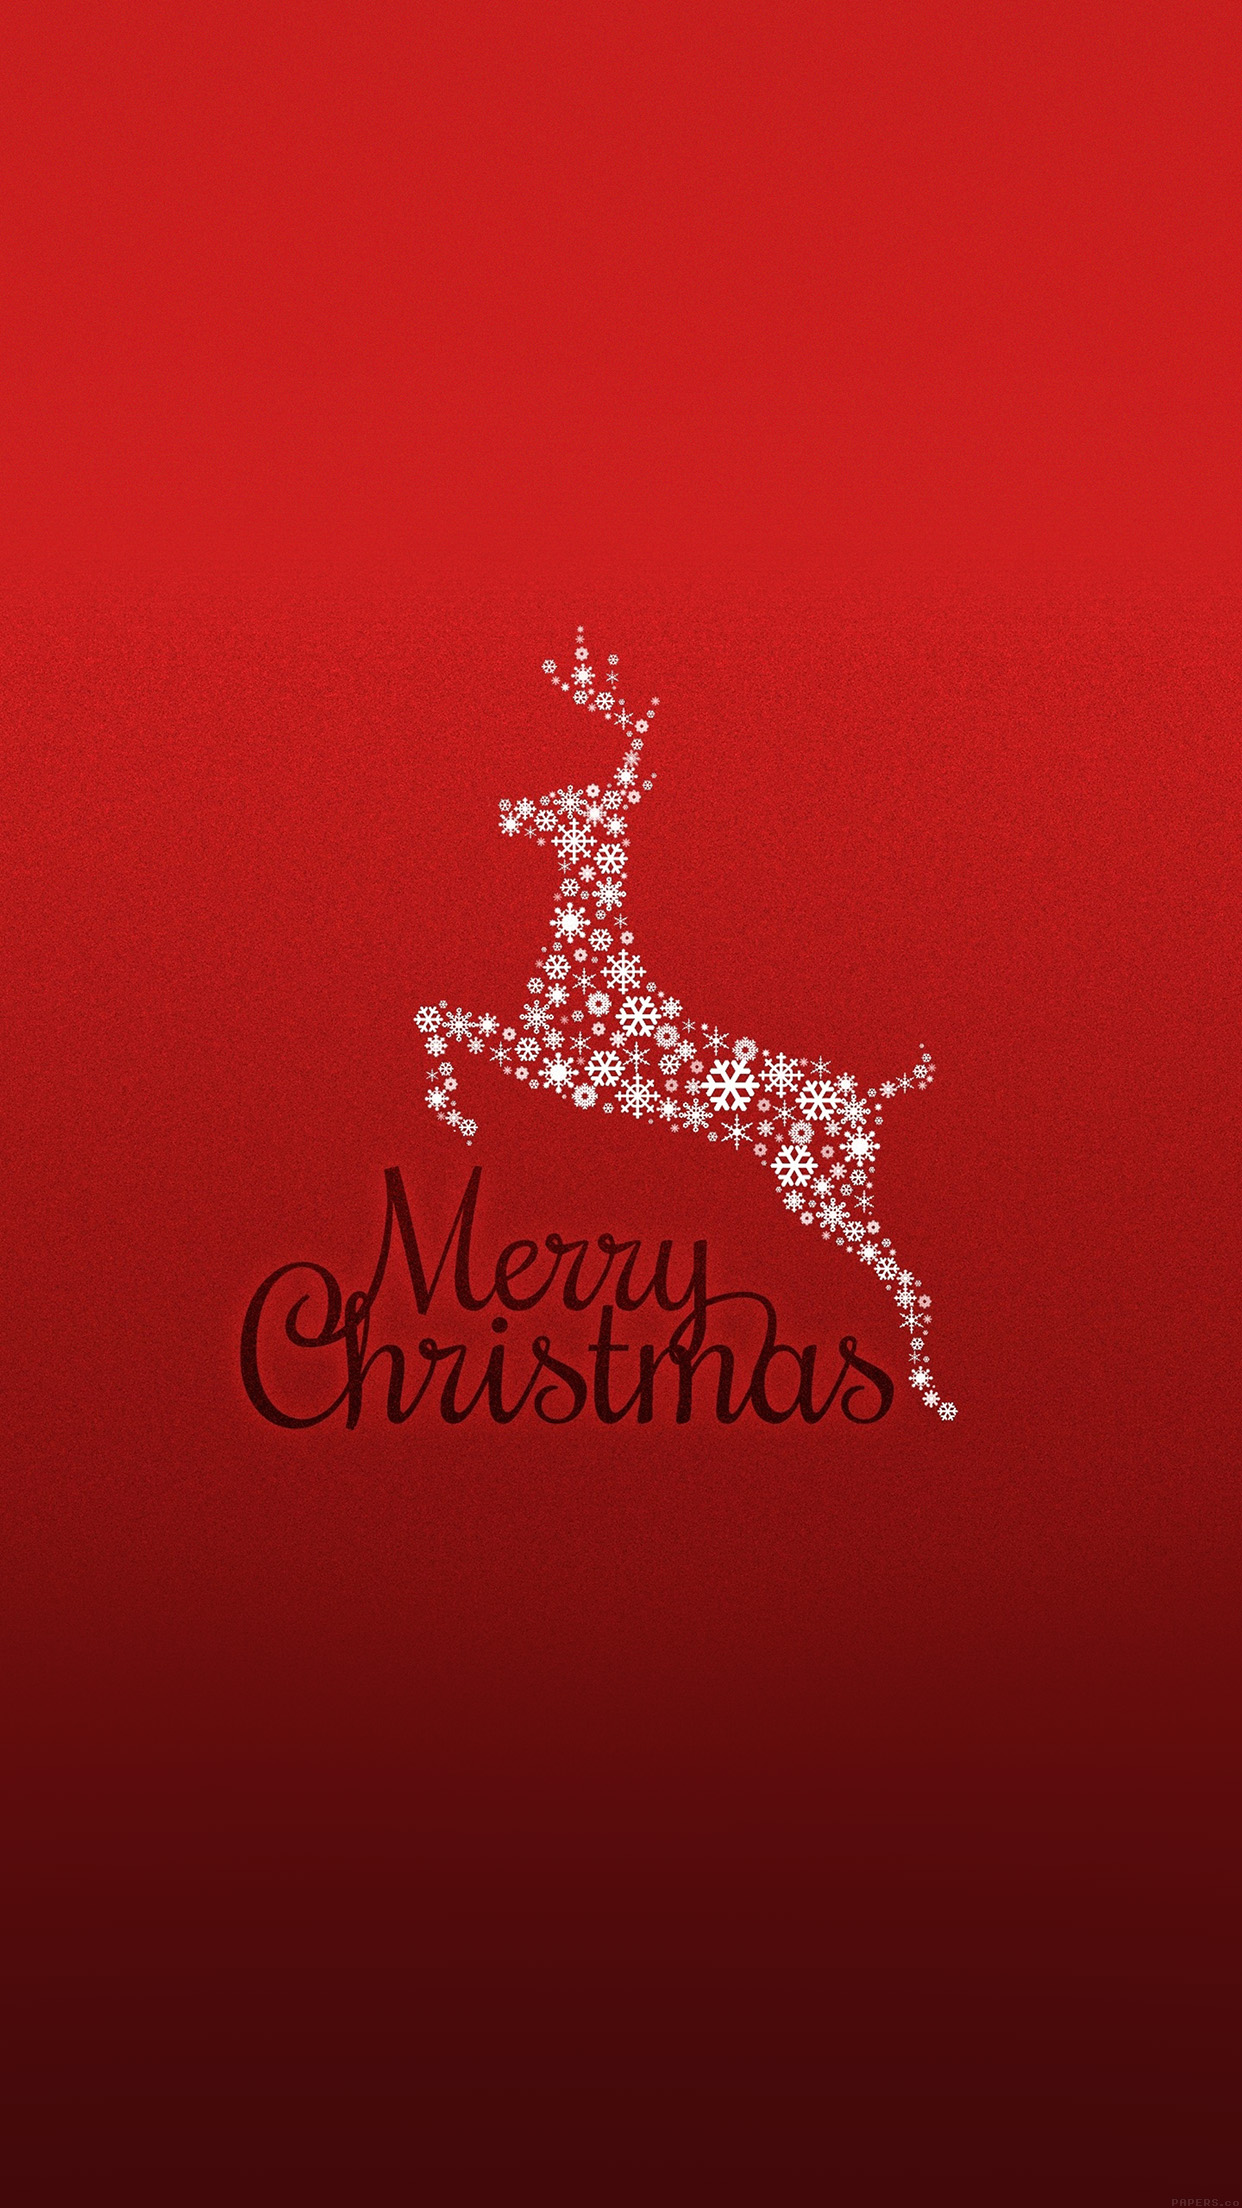 iPhone-wallpaper-for-Christmas-Free-to-Download-28.